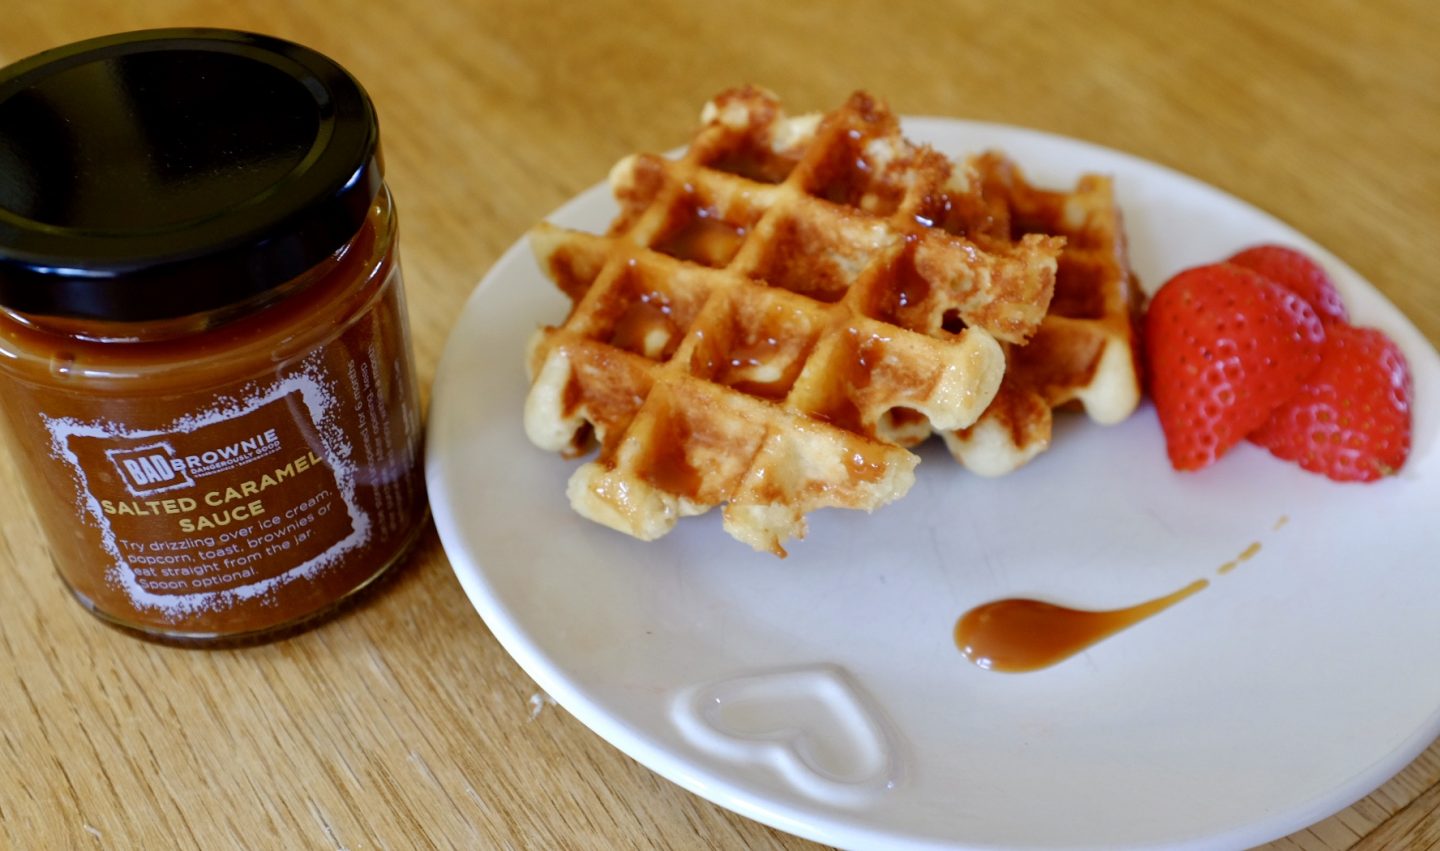 Belgian waffles with Bad brownie salted caramel sauce